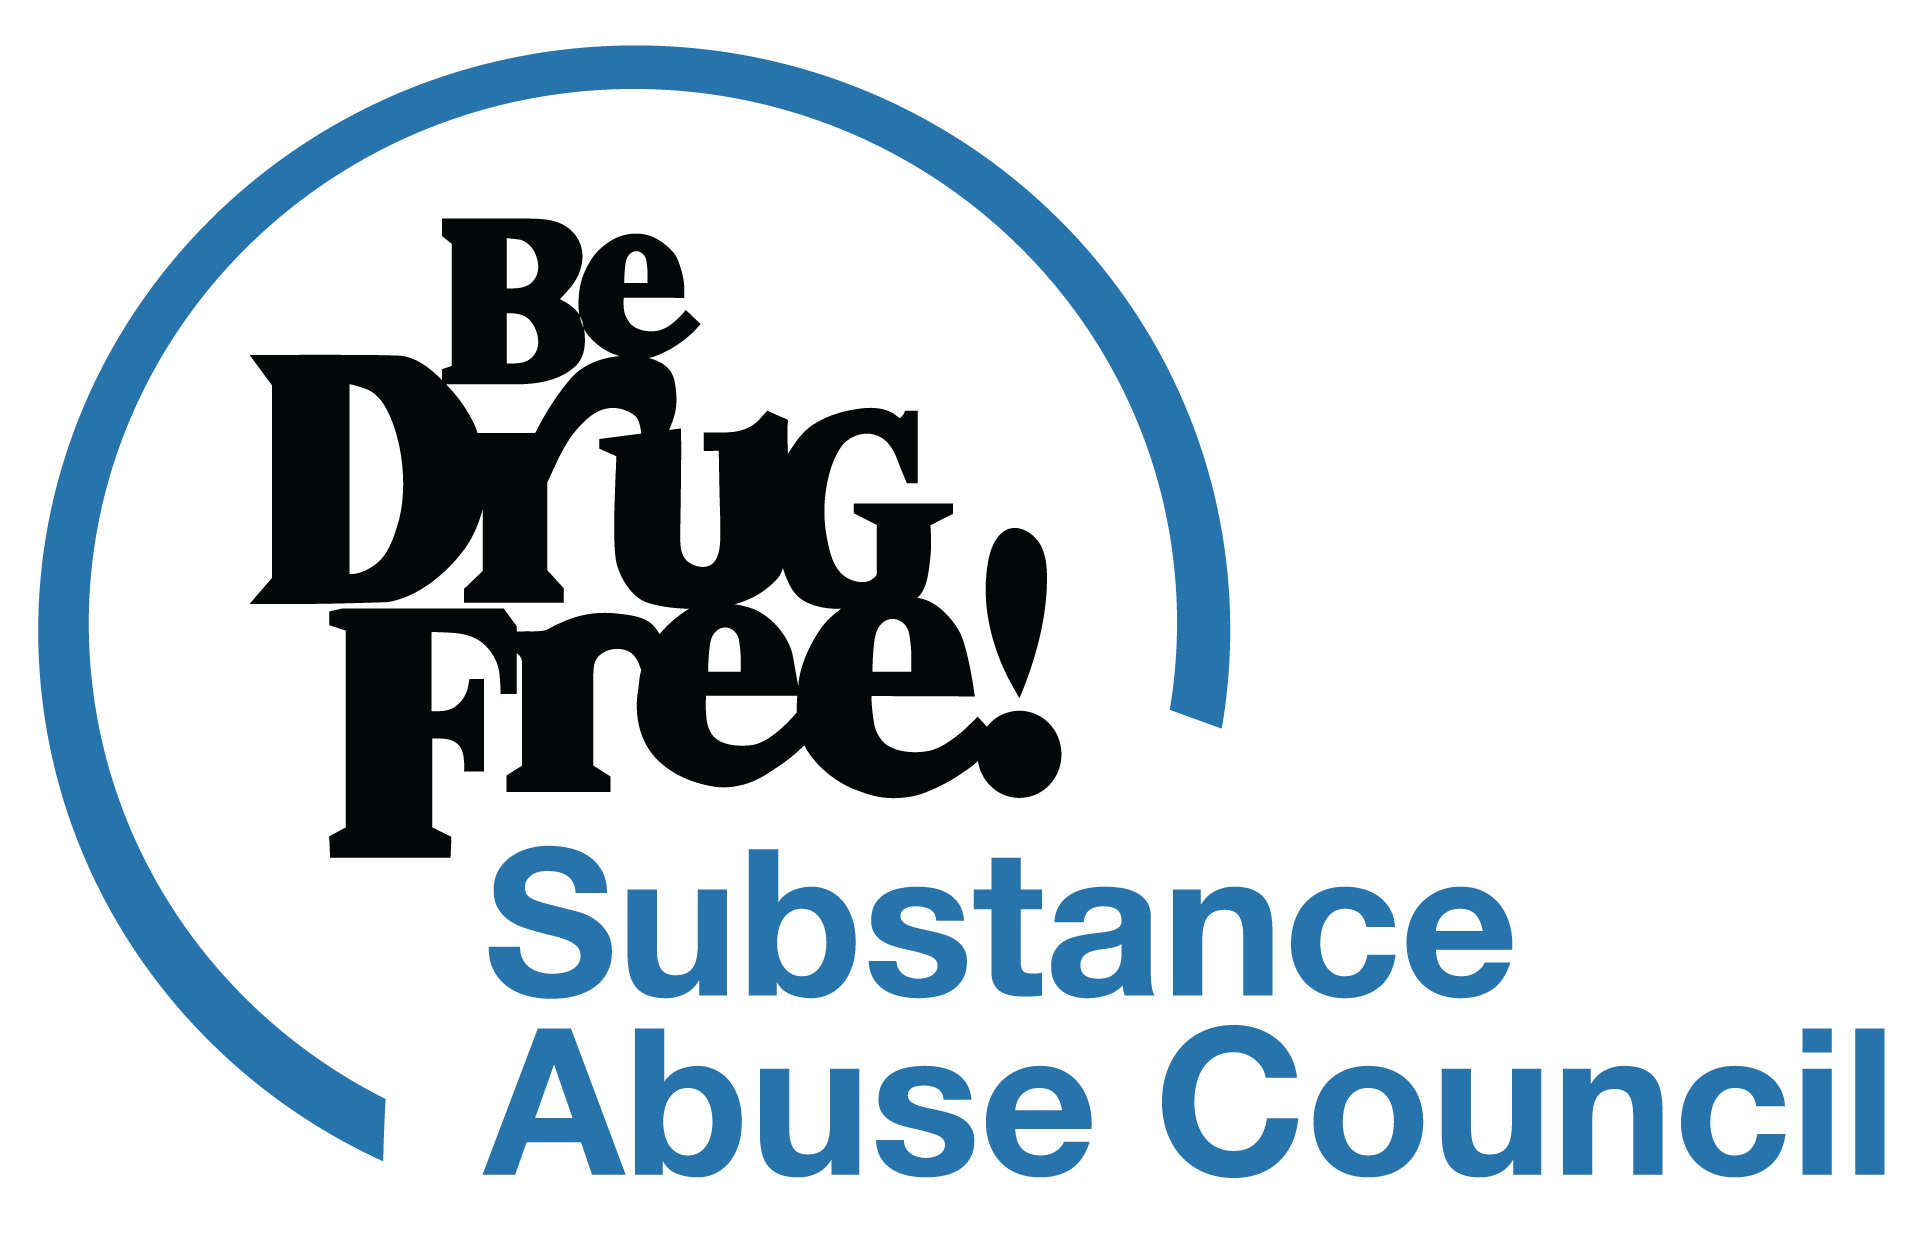 Substance Abuse Council